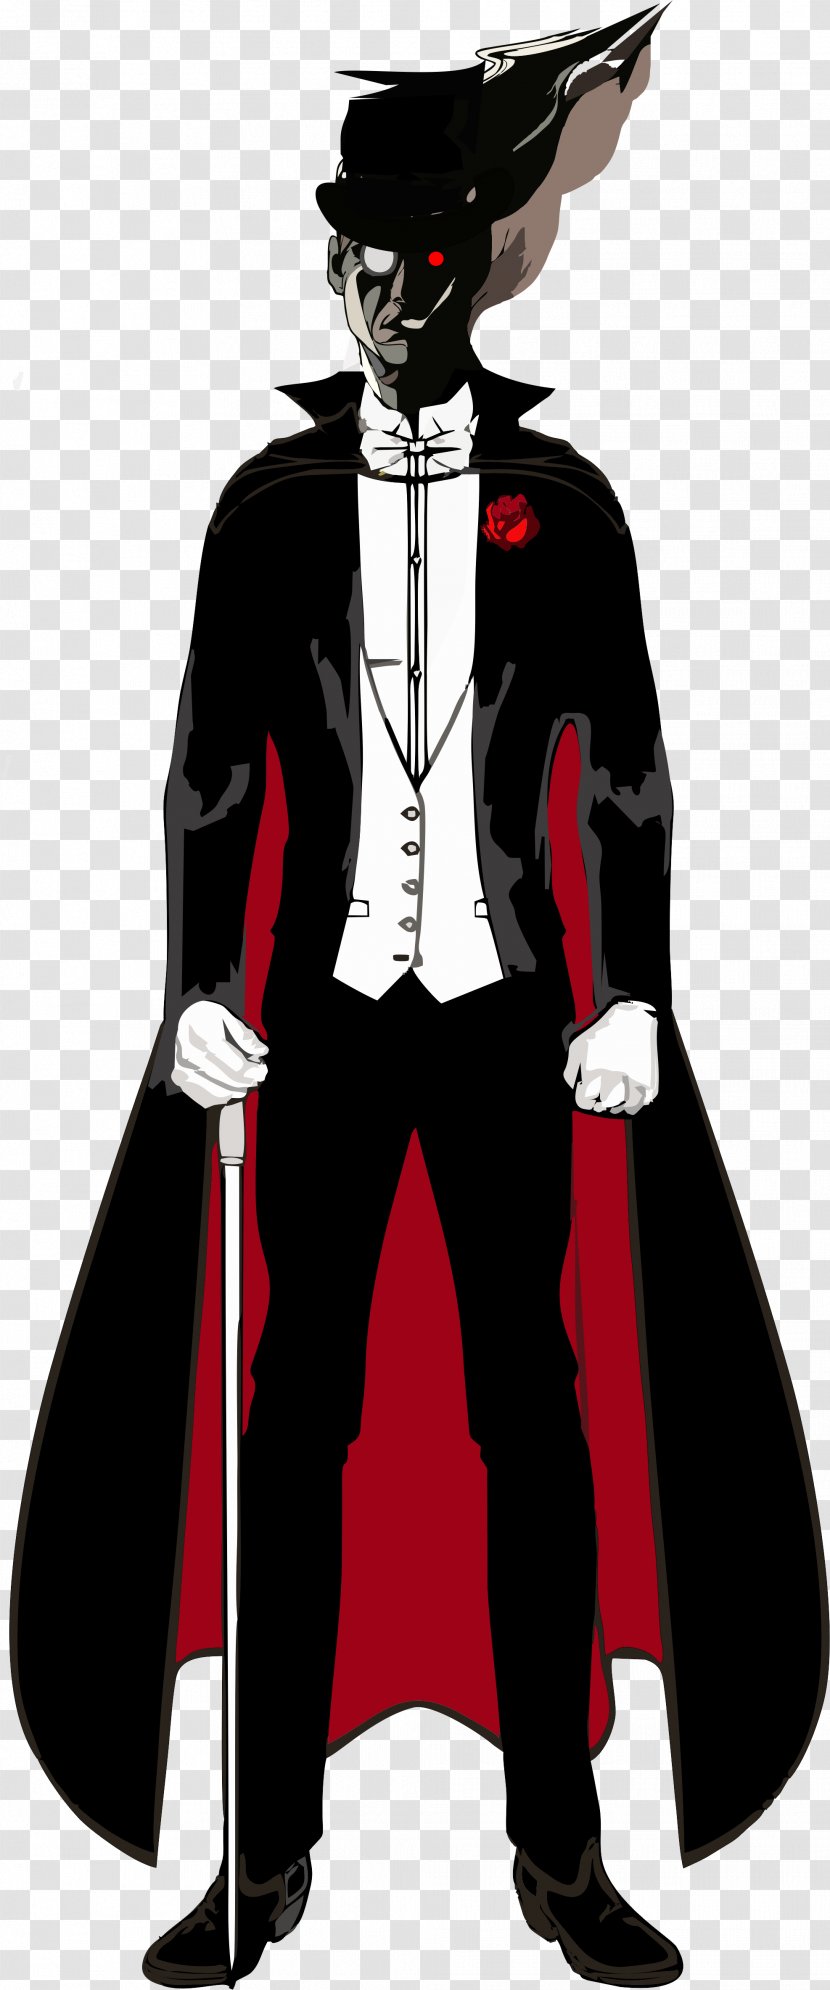 L'aiguille Creuse The Hollow Needle 괴도 루팡 Arsène Lupin Costume Design - Fictional Character - Outerwear Transparent PNG